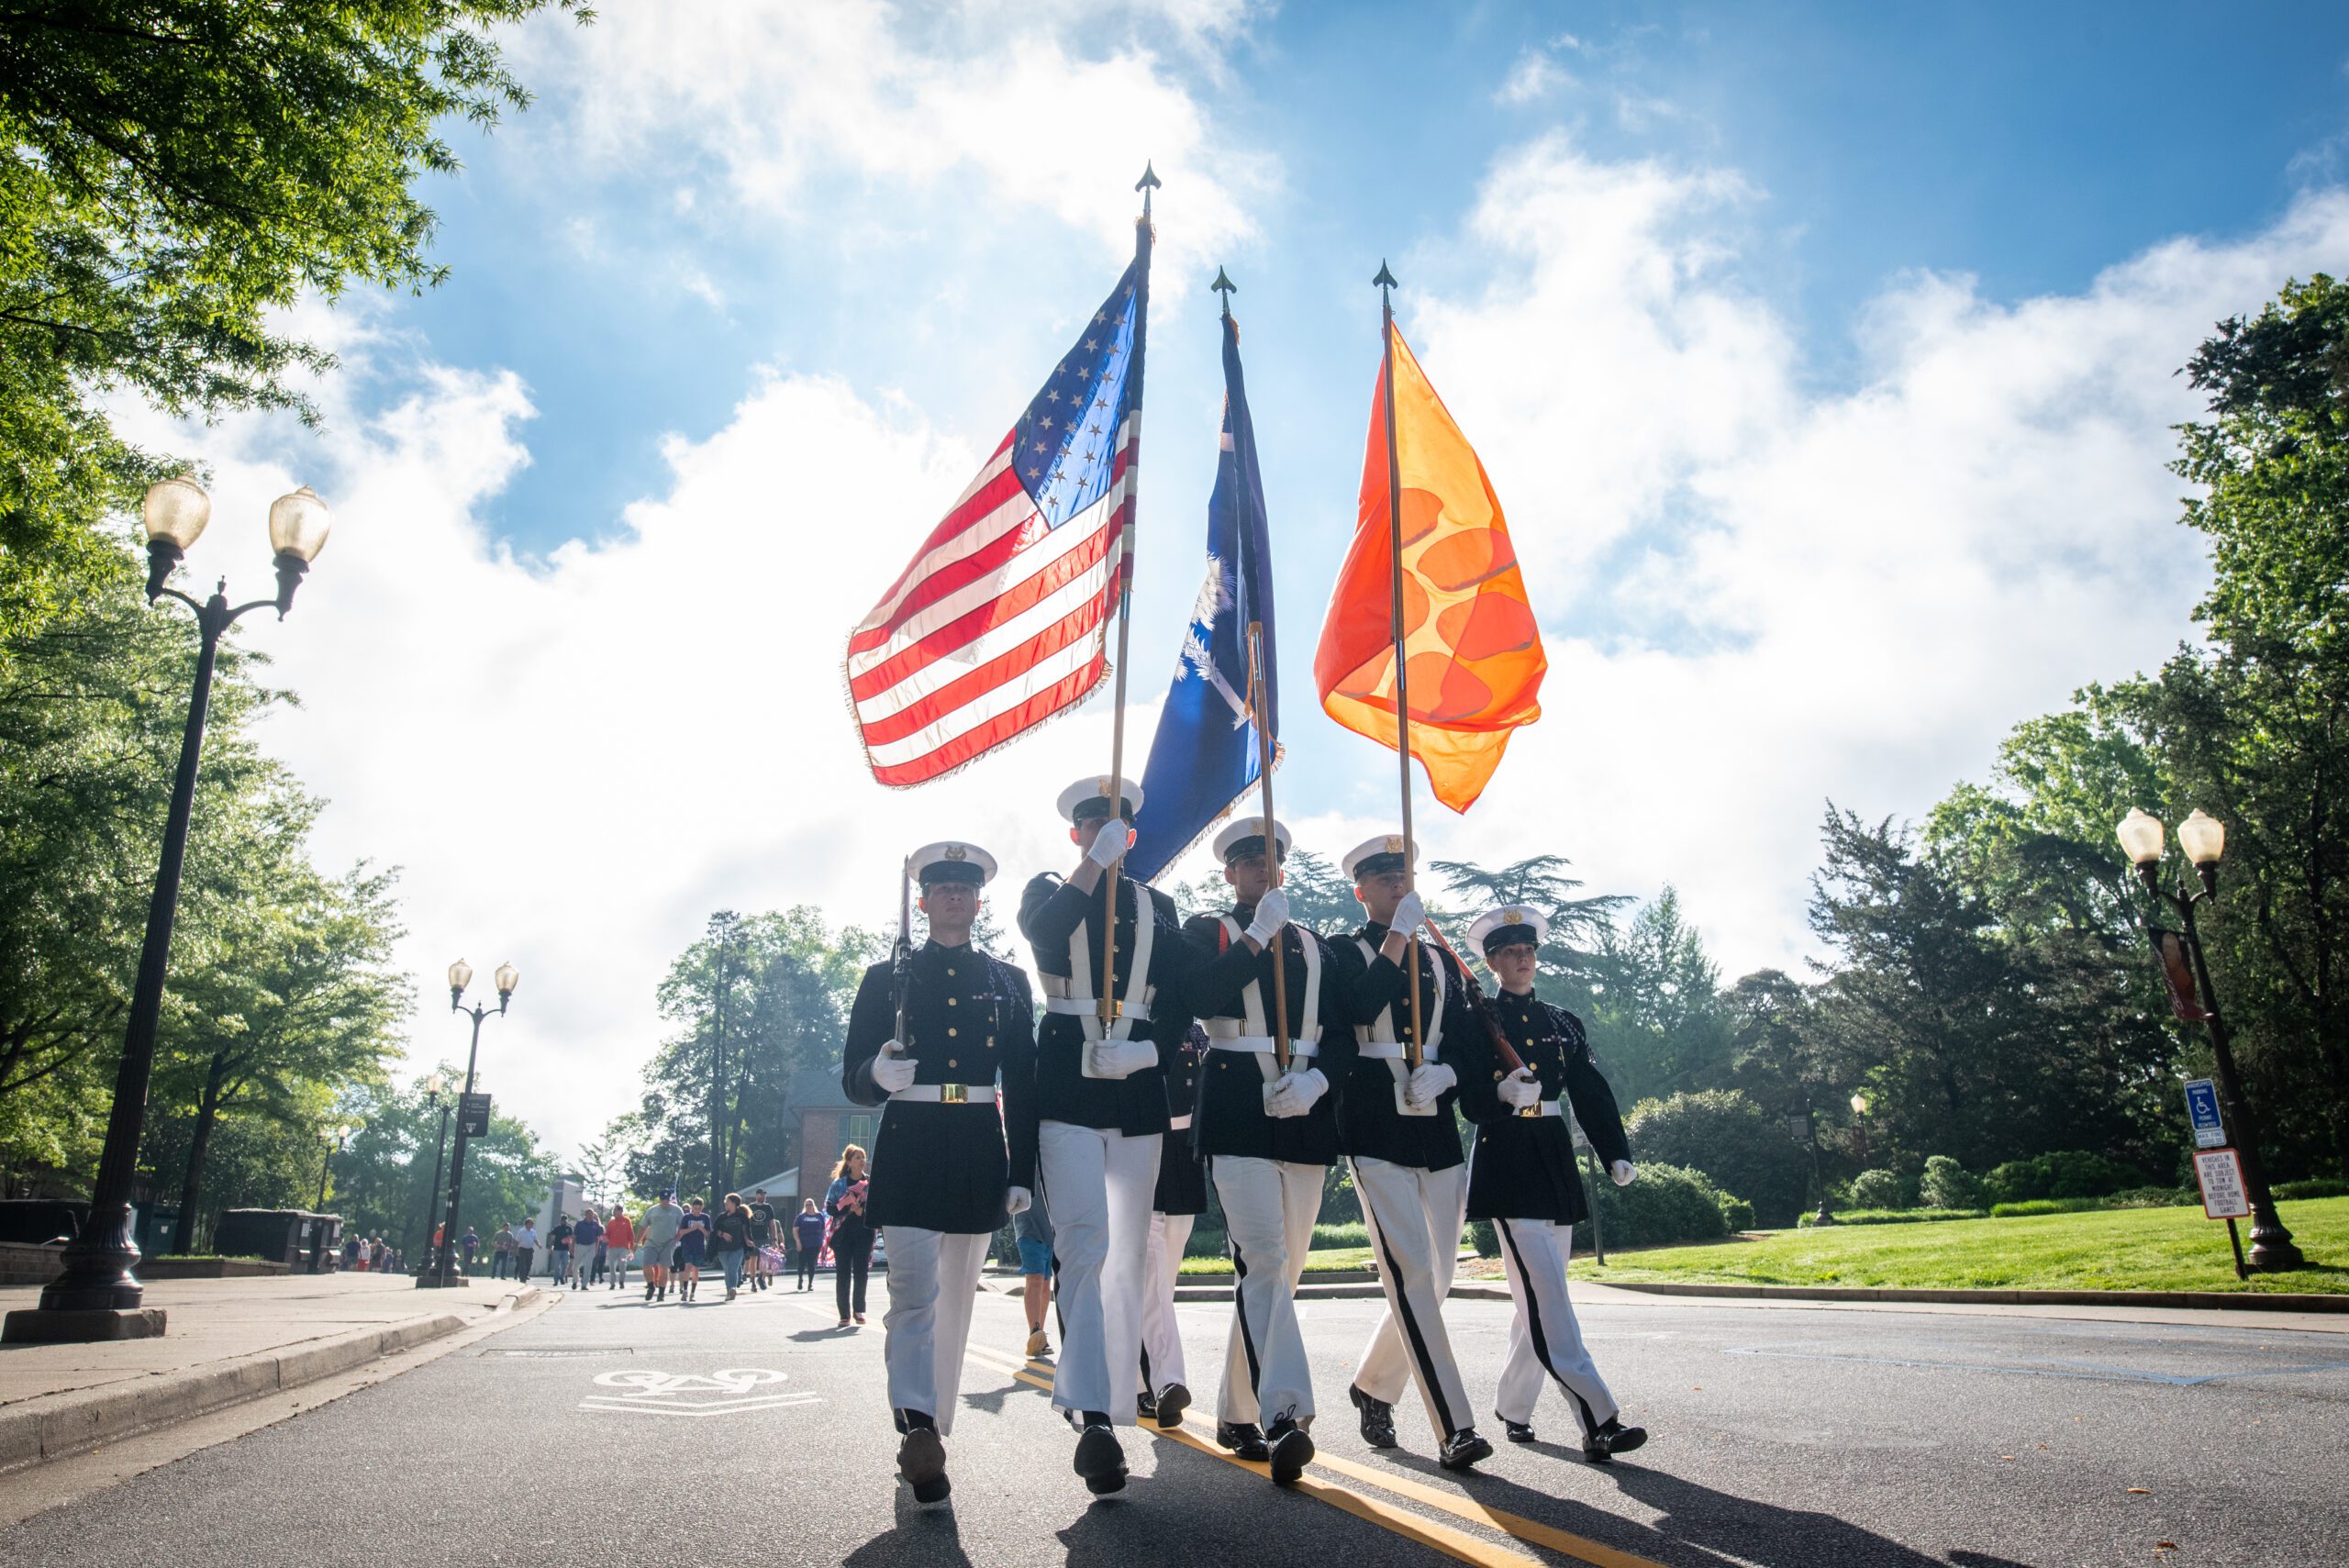 Five ROTC members walk down a road holding flag poles carrying the American flag, South Carolina flag, and Clemson flag.